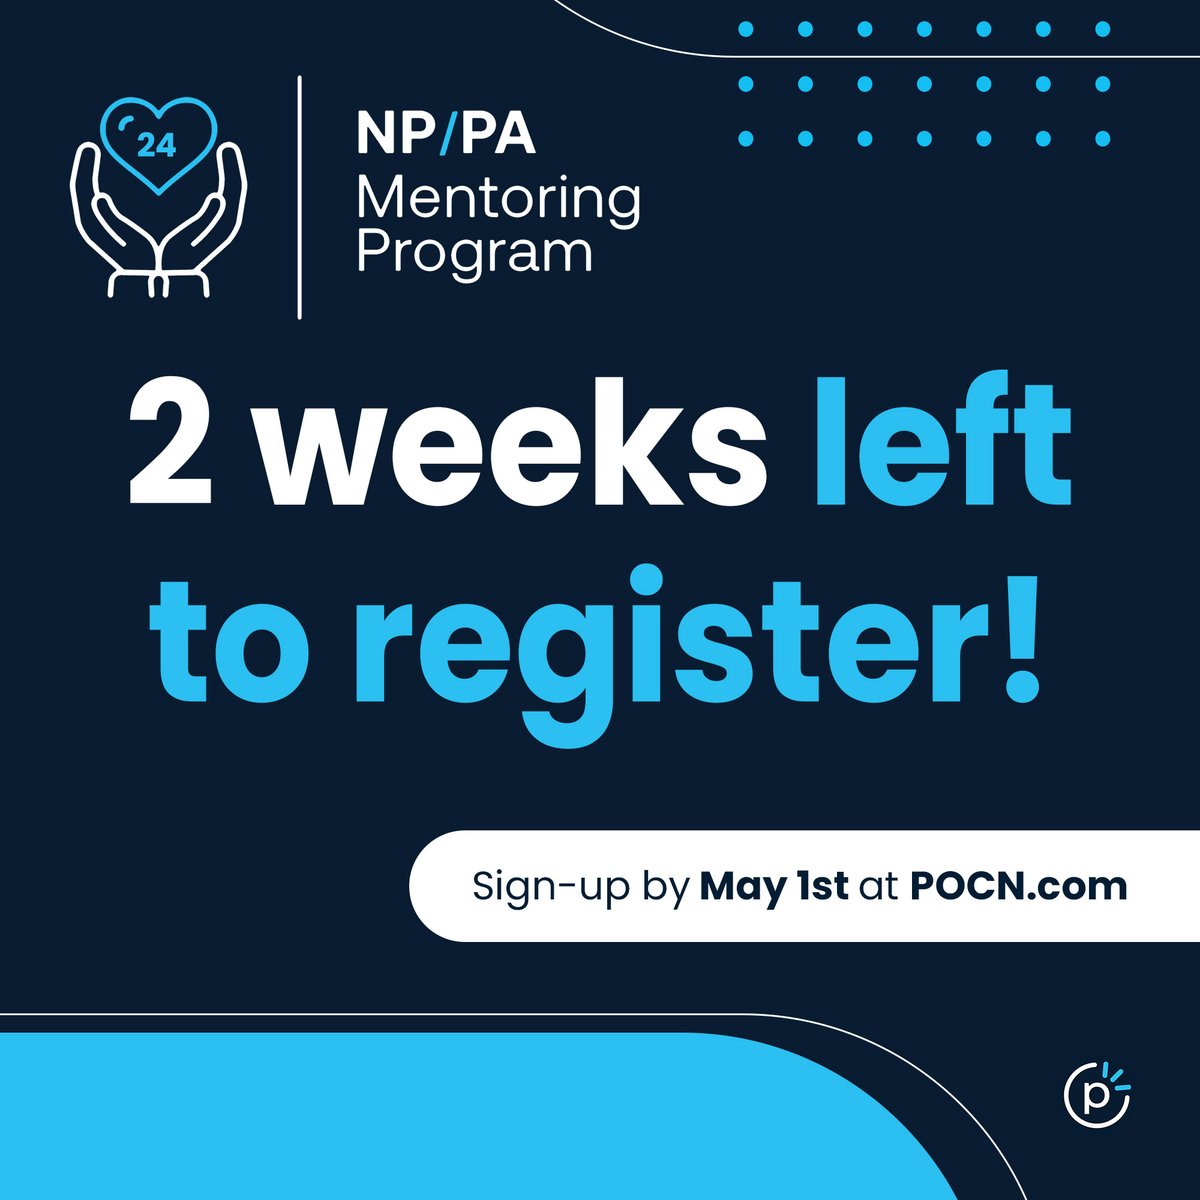 Just 2 weeks left to join our NP/PA Mentorship Program! Enhance your skills and connect with expert mentors. Don't miss this opportunity for professional growth. Register now: tinyurl.com/3dkv2xyj #Mentorship #NursePractitioners #PhysicianAssociates